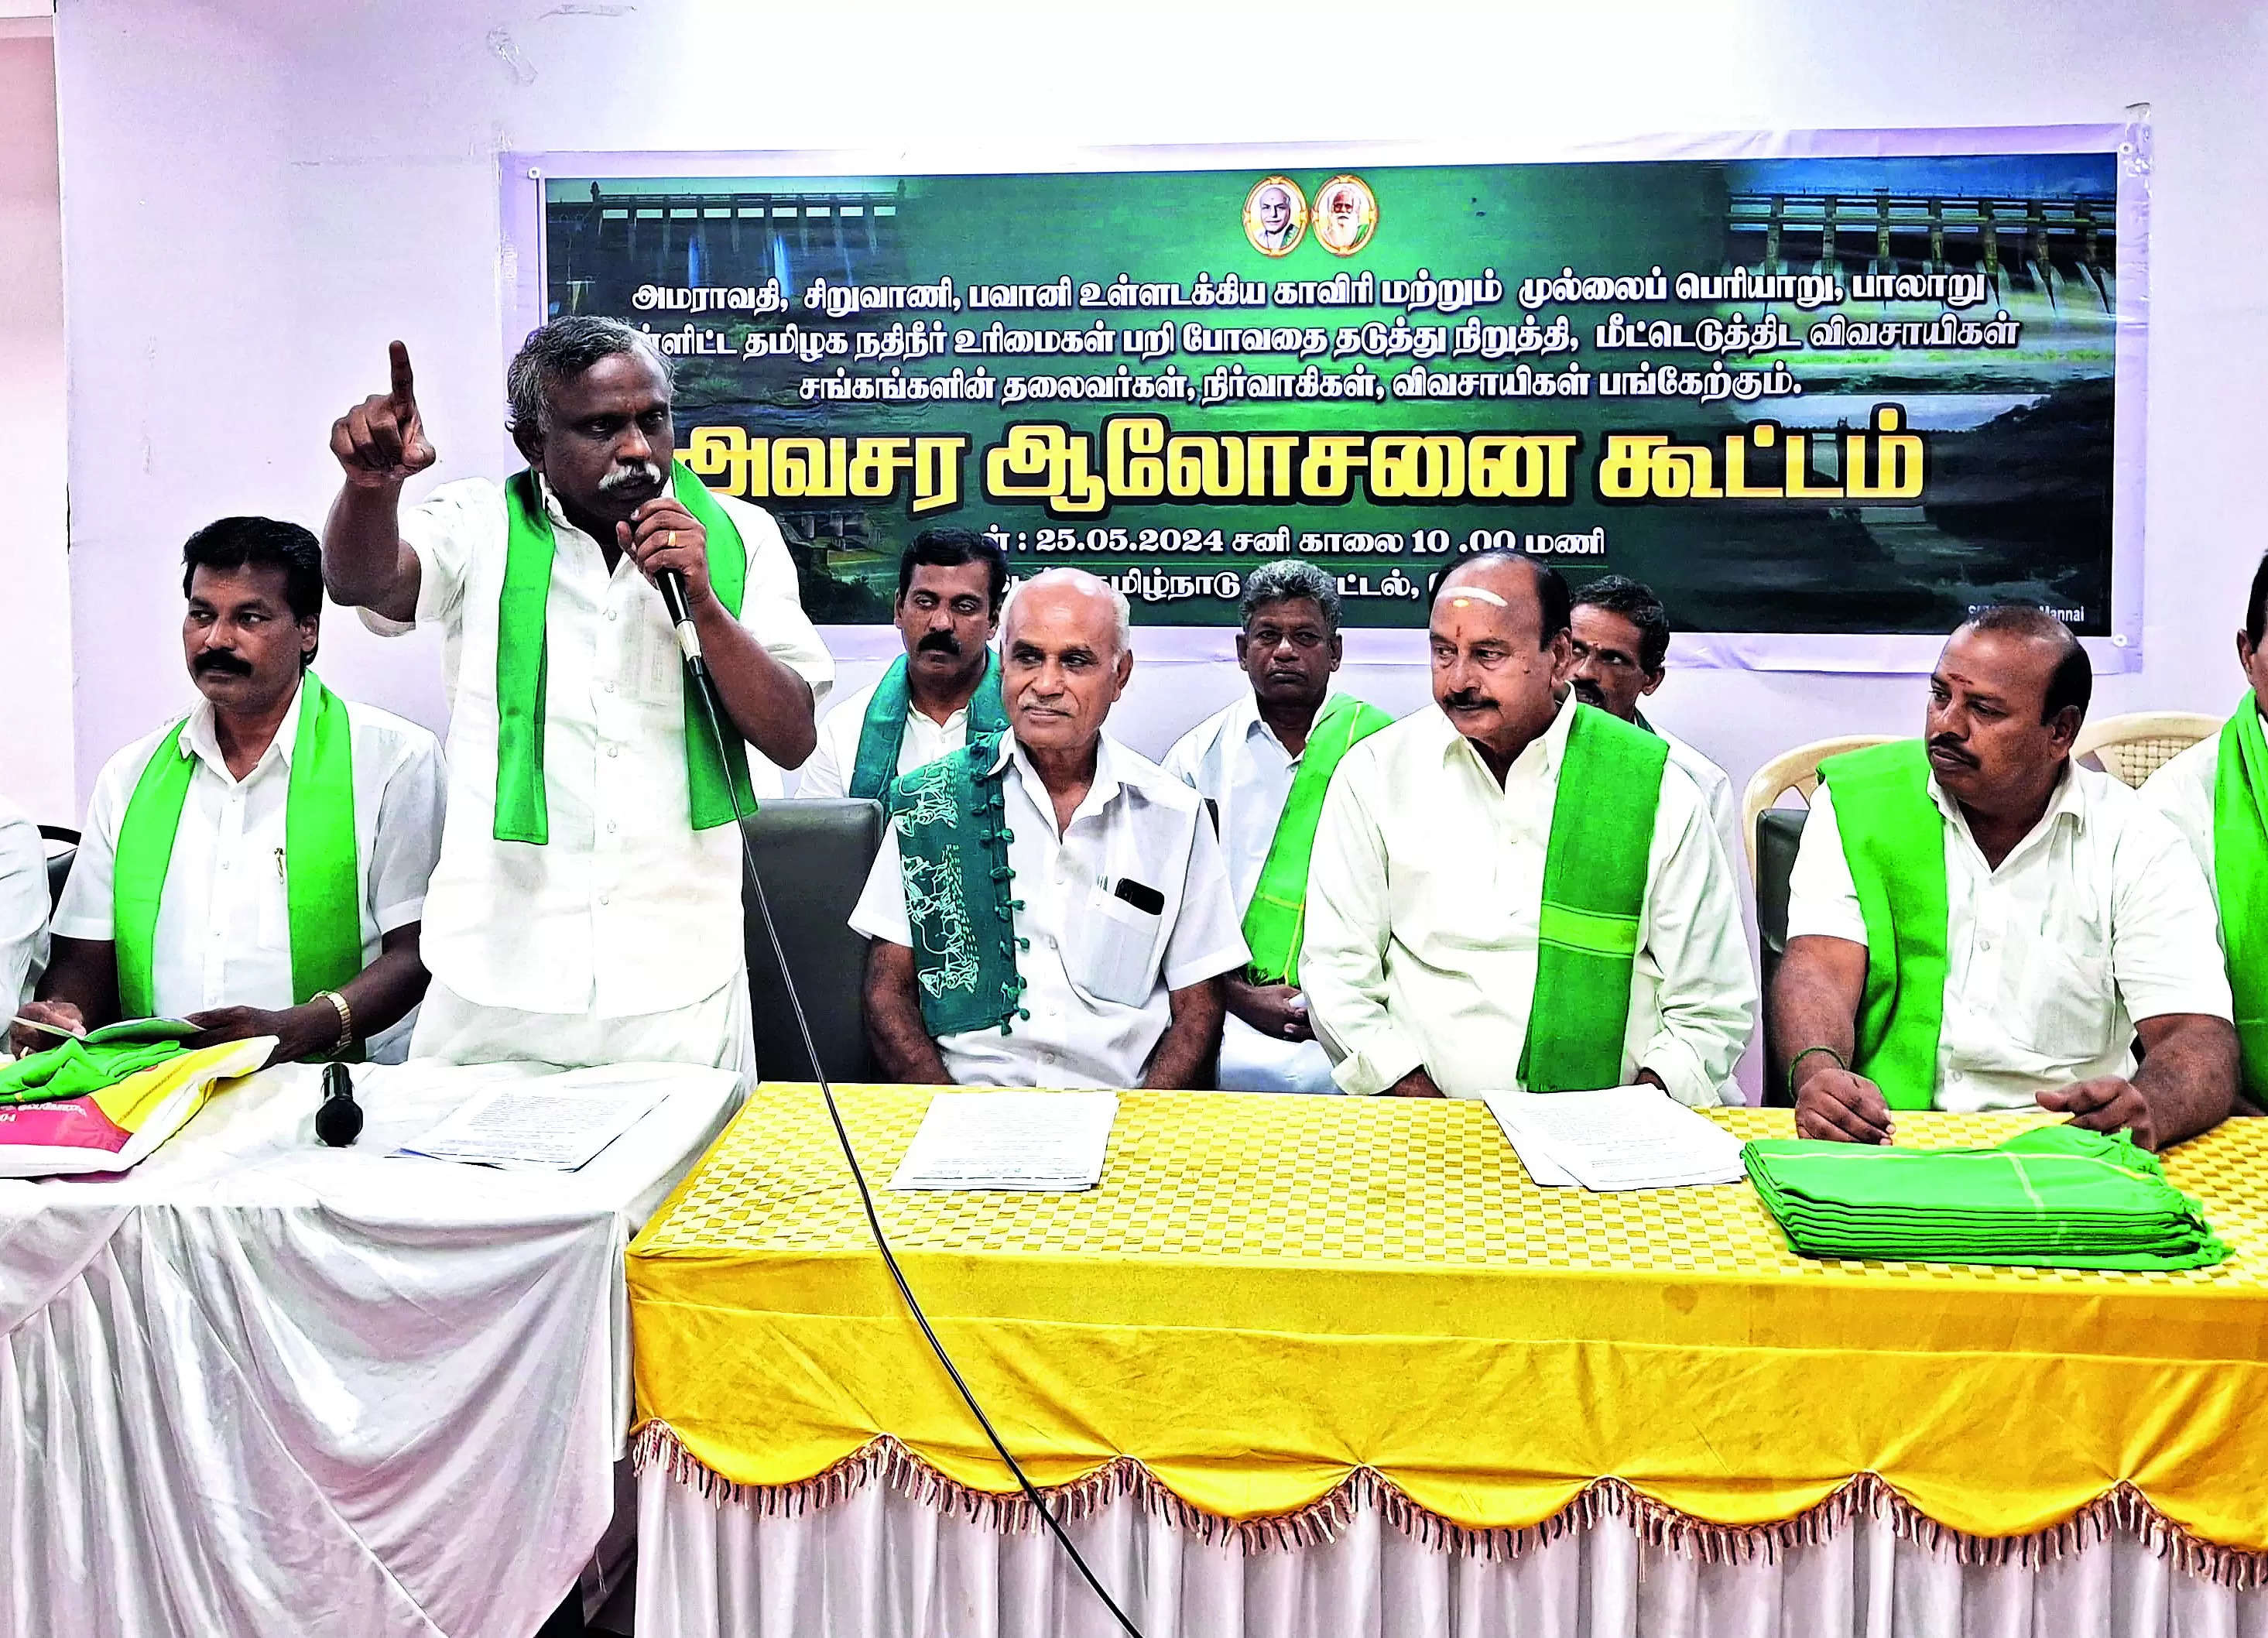 Farmers slam CM for allowing Kerala to build check dams